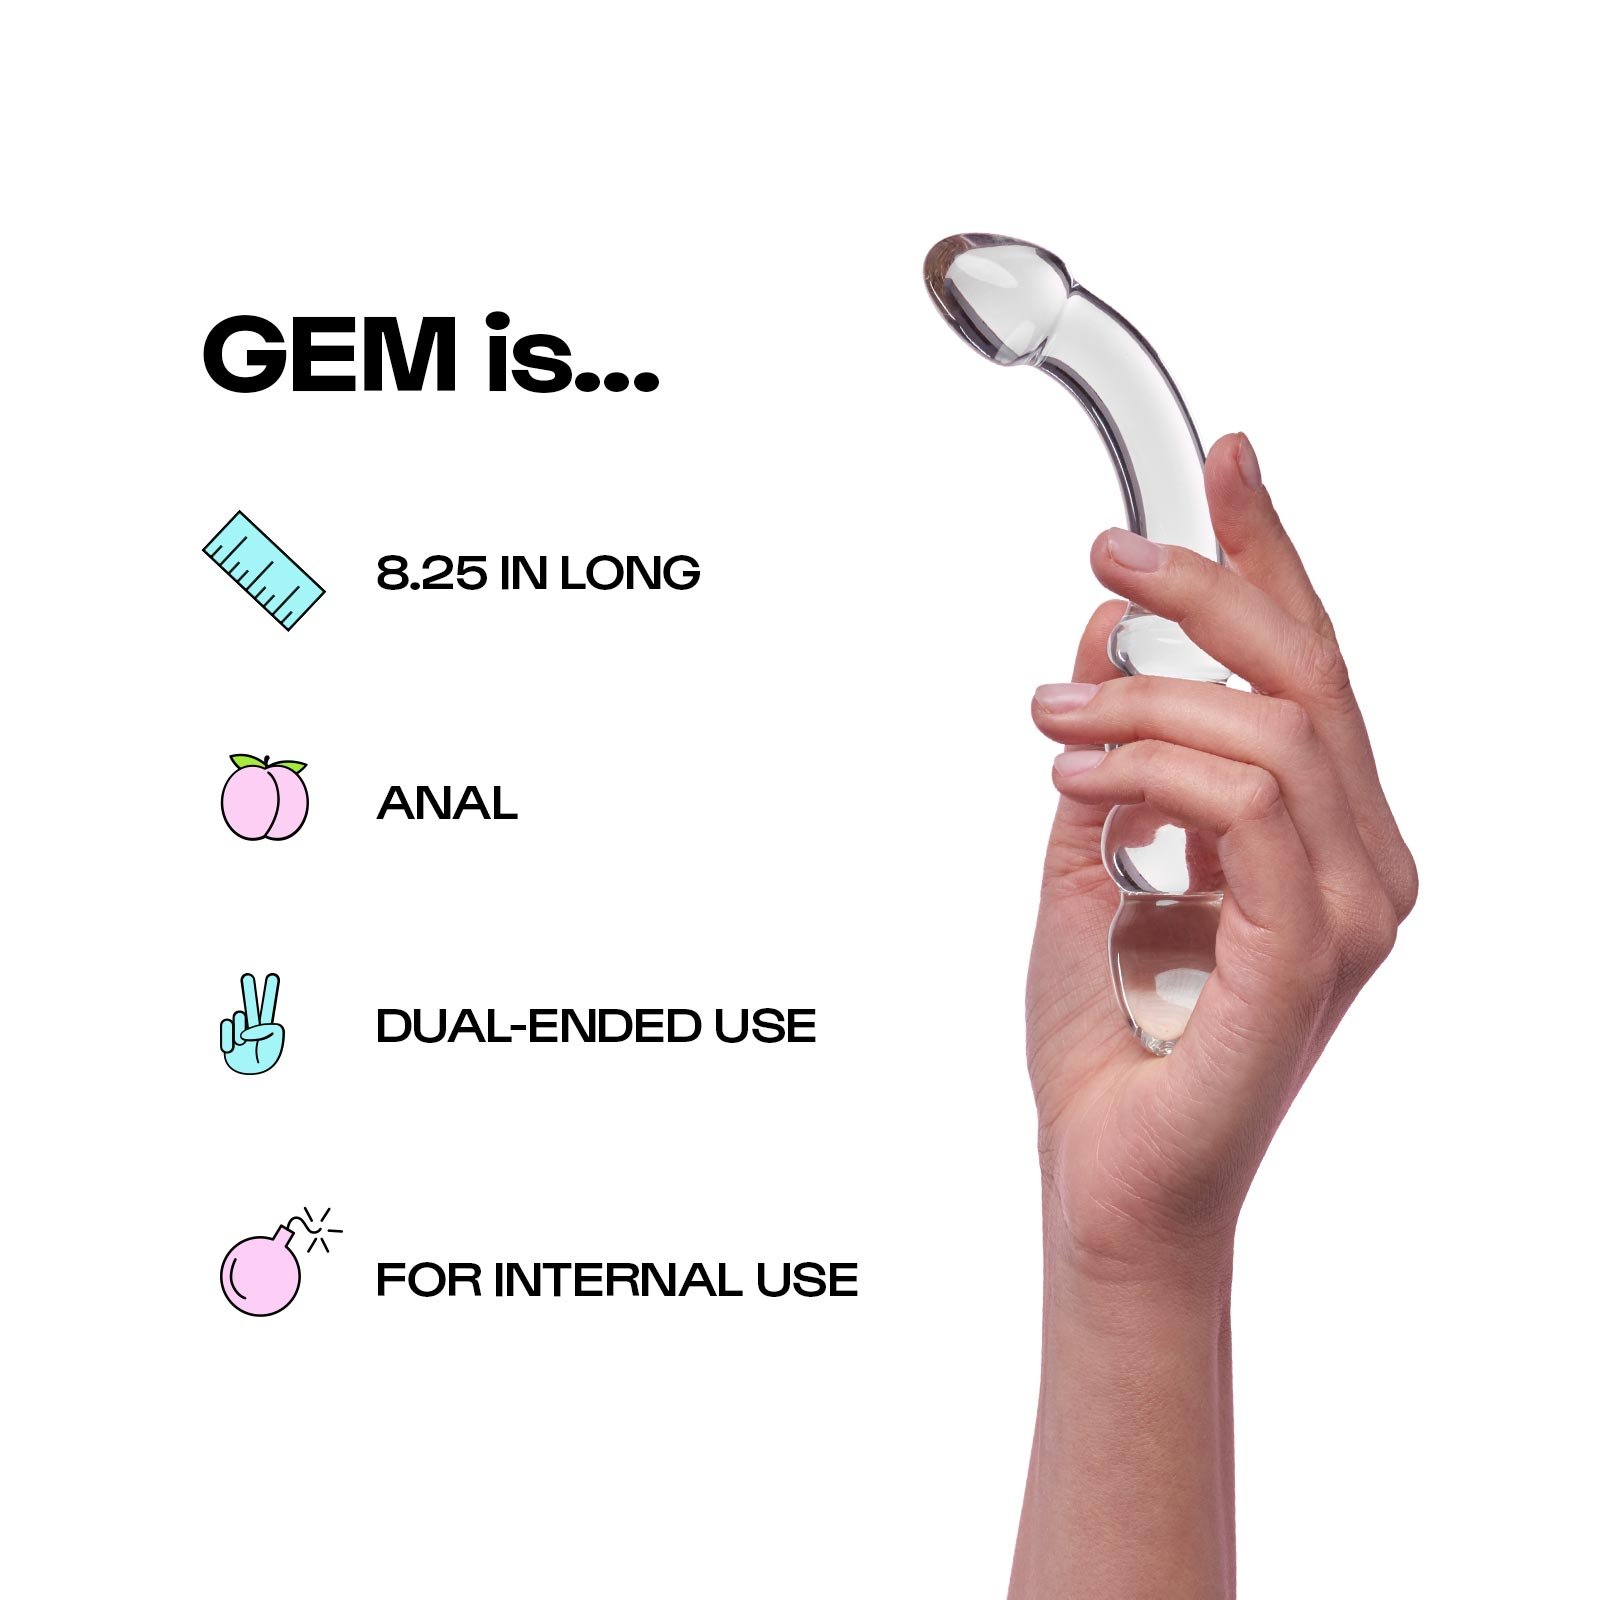 gem is 8.25 in long, anal, dual ended use, for internal use